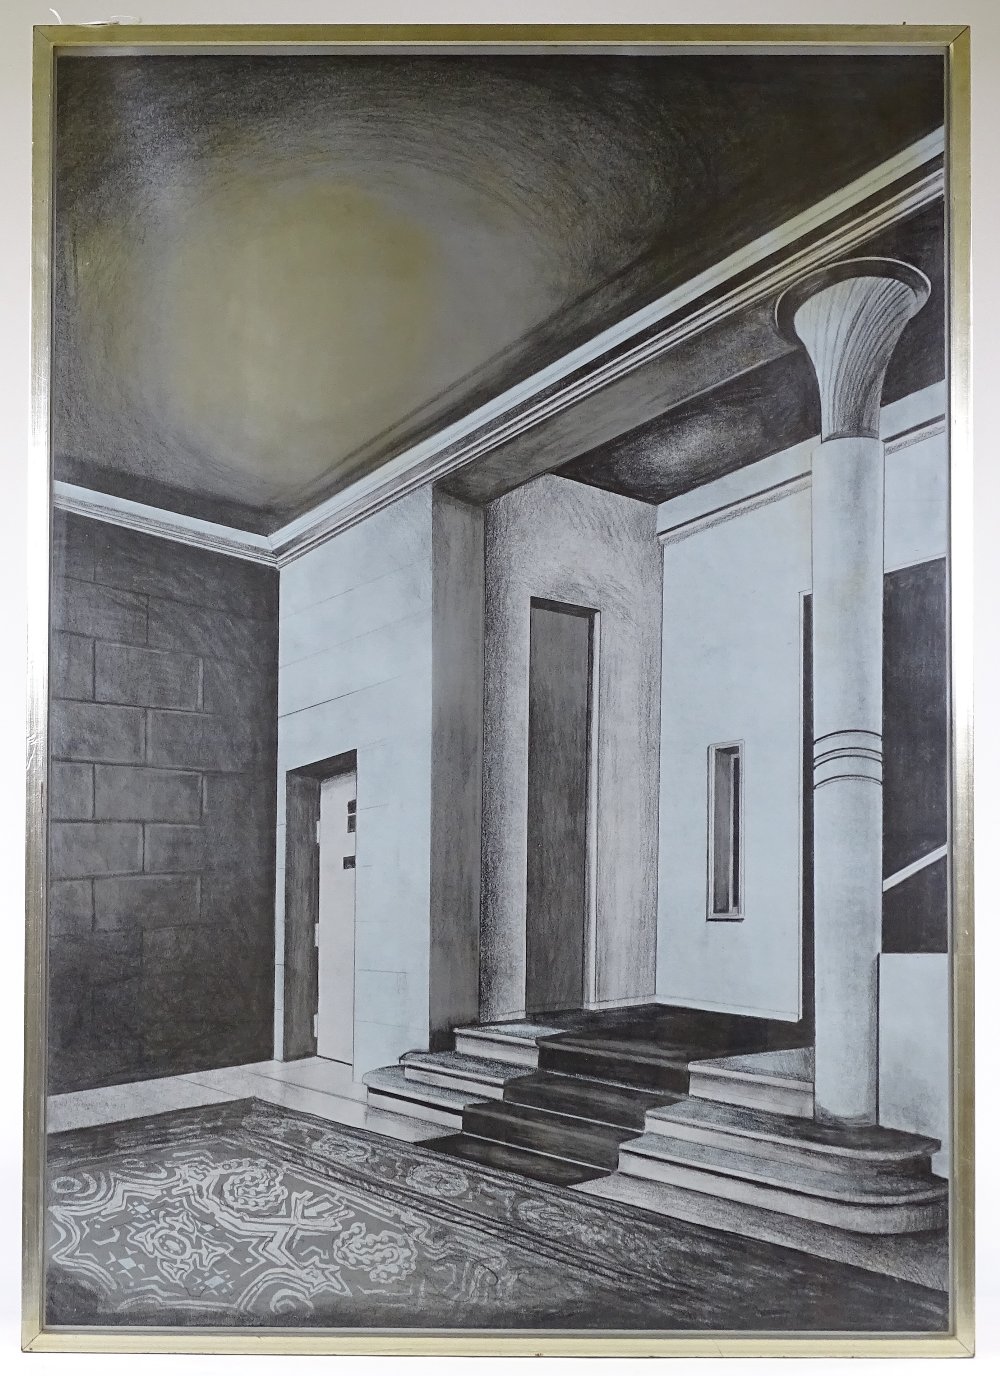 Lowell Nesbitt (American died 1993), offset lithograph interior scene, from an edition of 75,